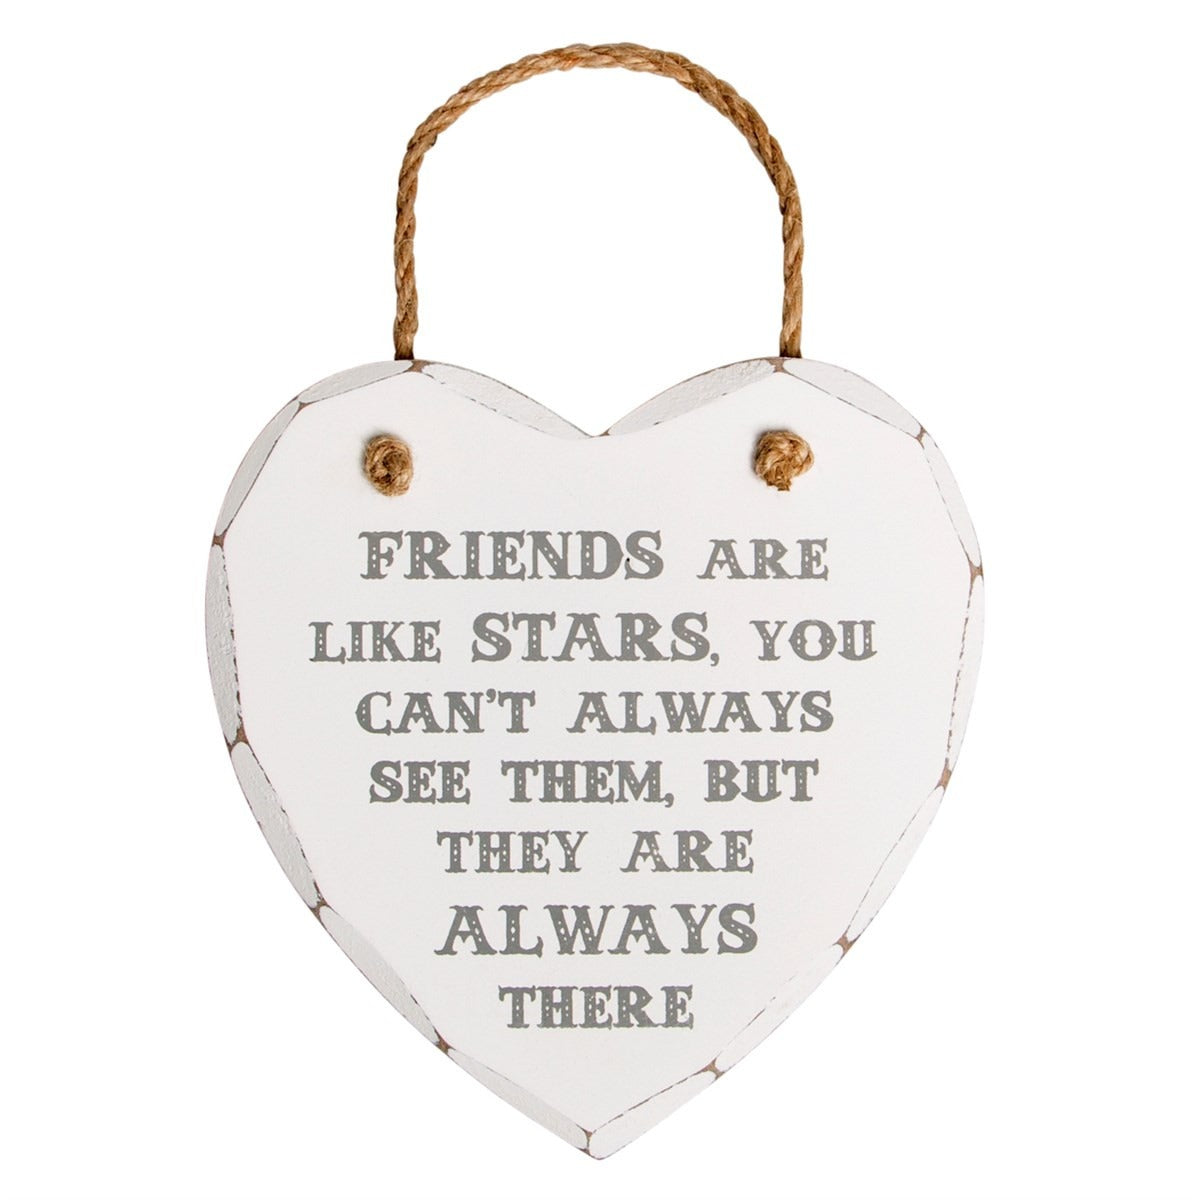 View Friends Are Like Stars Heart Plaque information